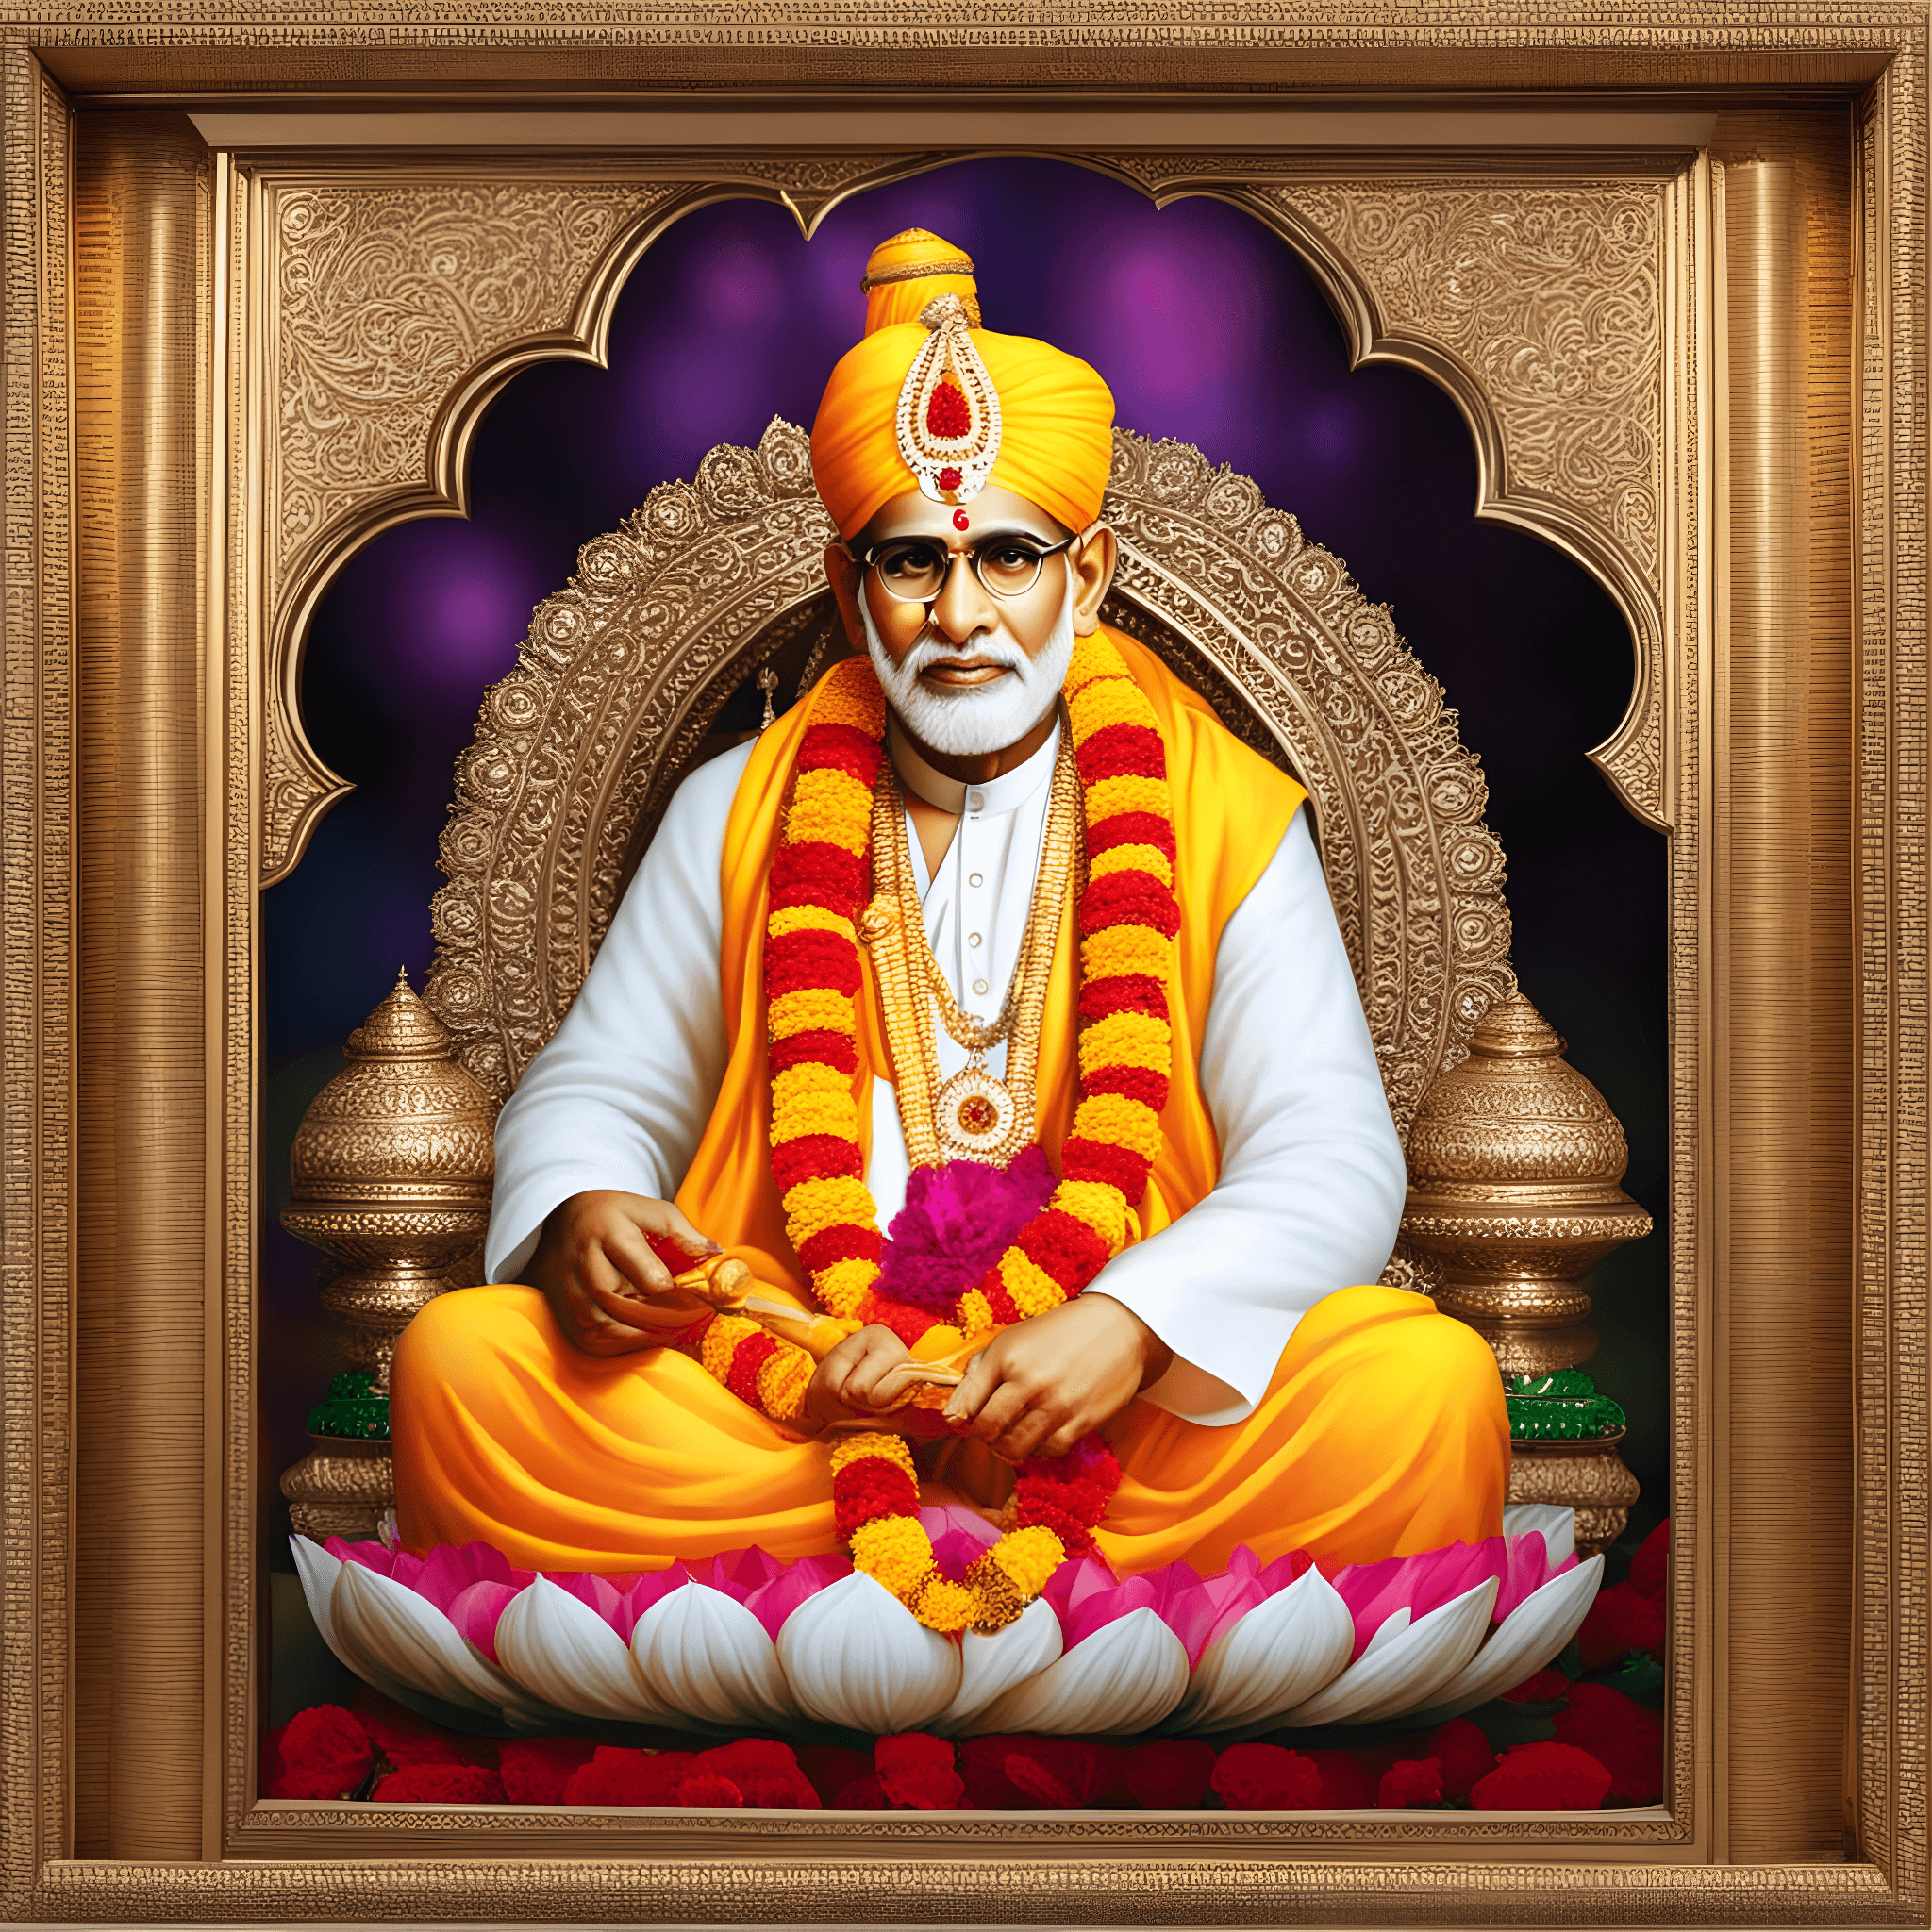 image-of-shirdi-with-hidden-5-sai-baba-images-in-single-frame (2)